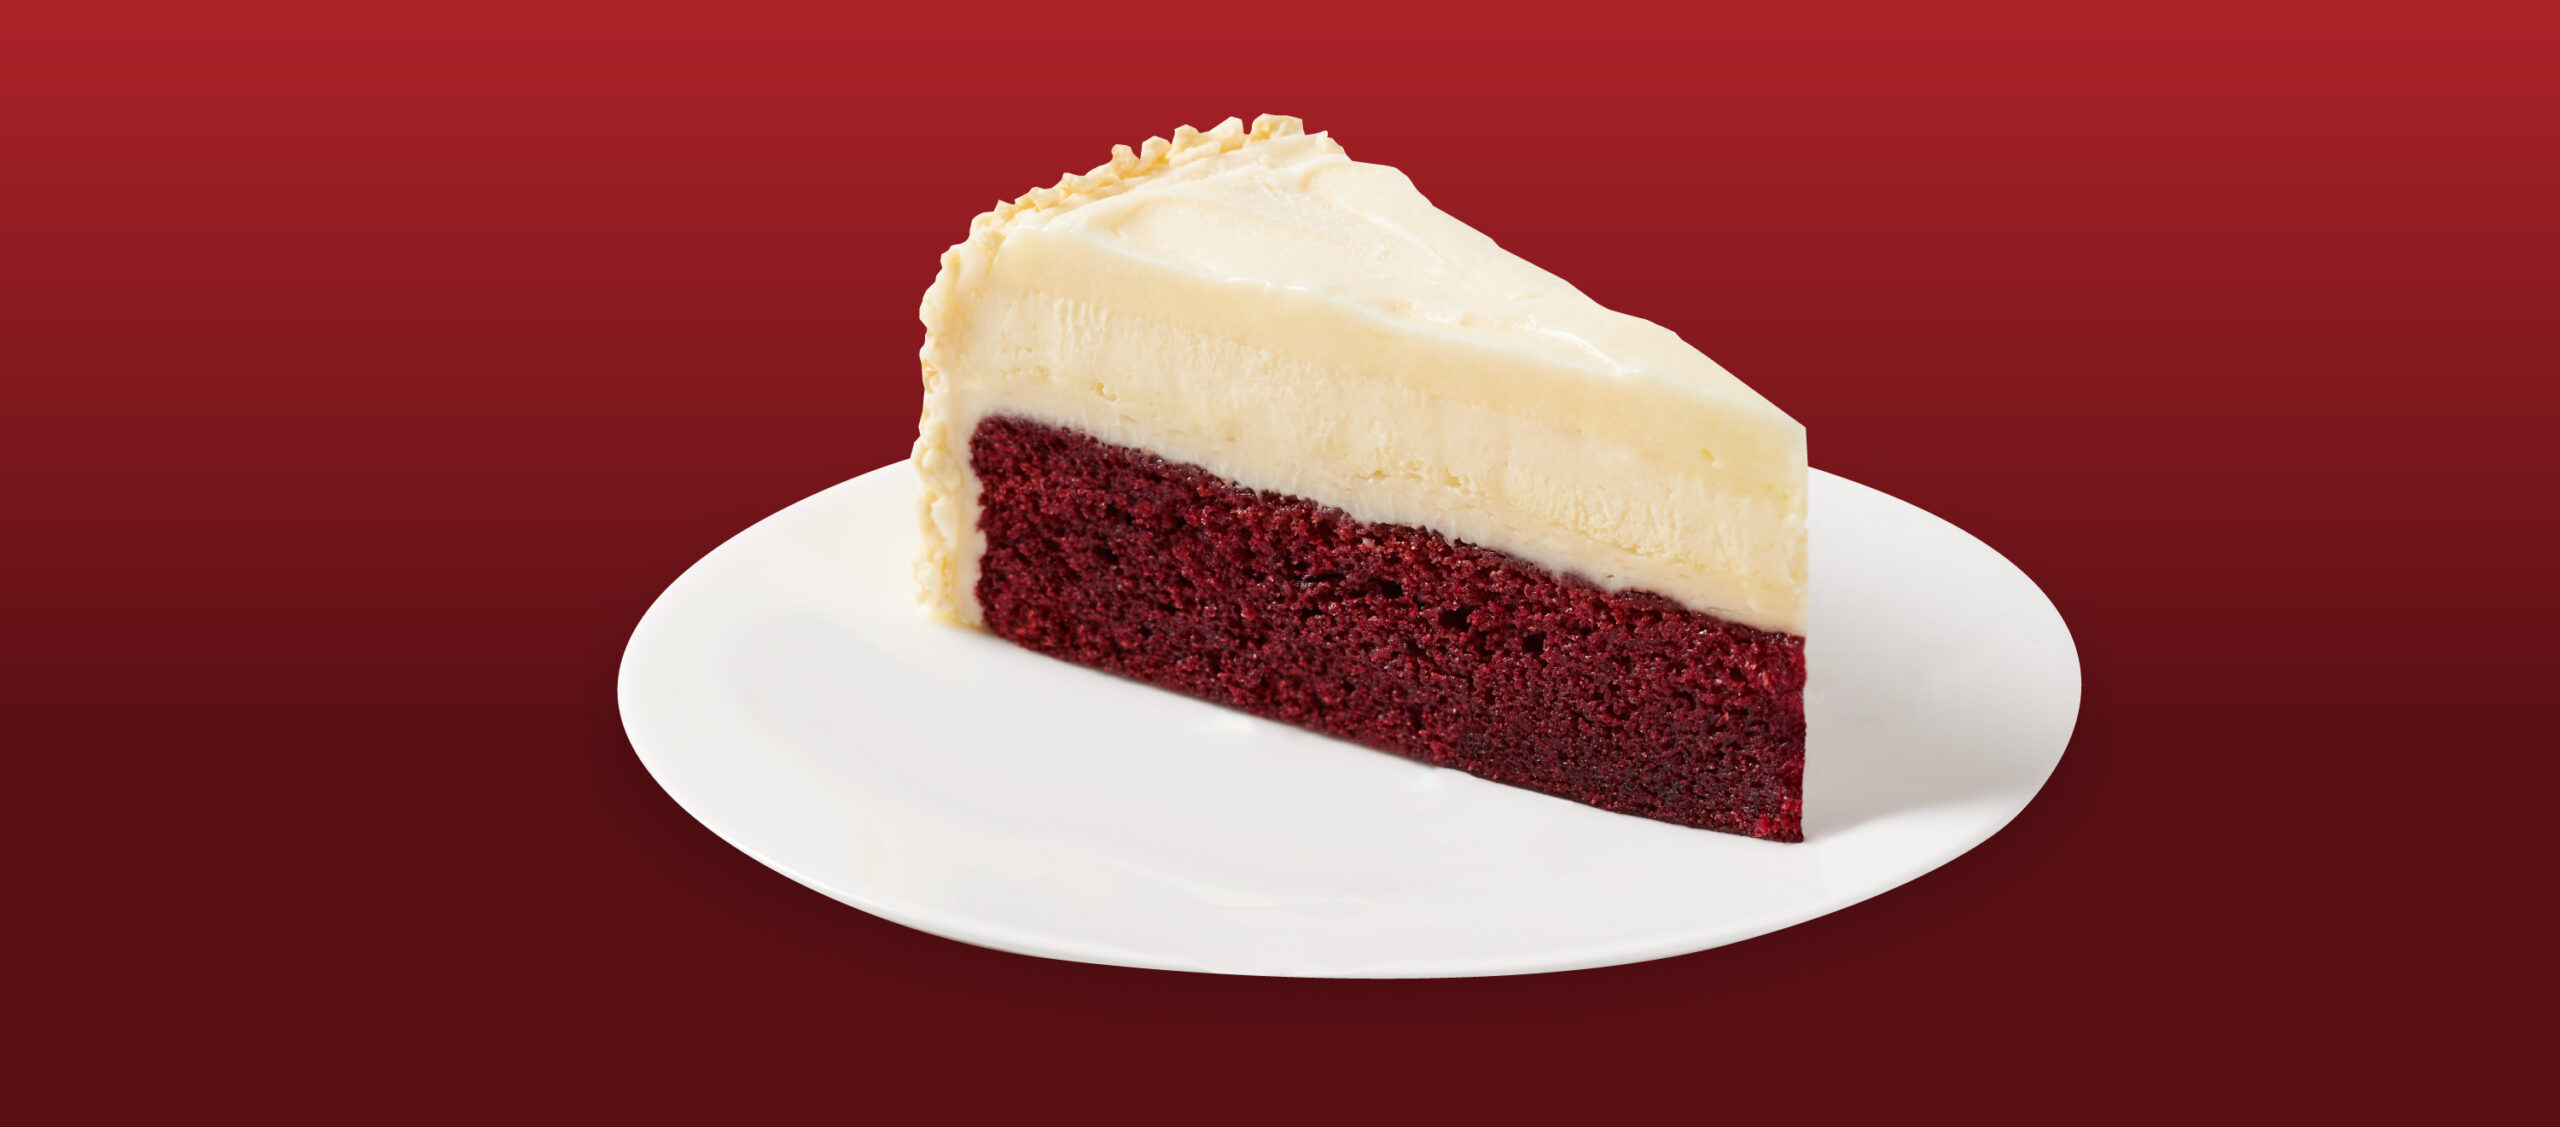 Come try this incredibly delicious Red Velvet Cake Cheesecake from The Cheesecake Factory Bakery.® 